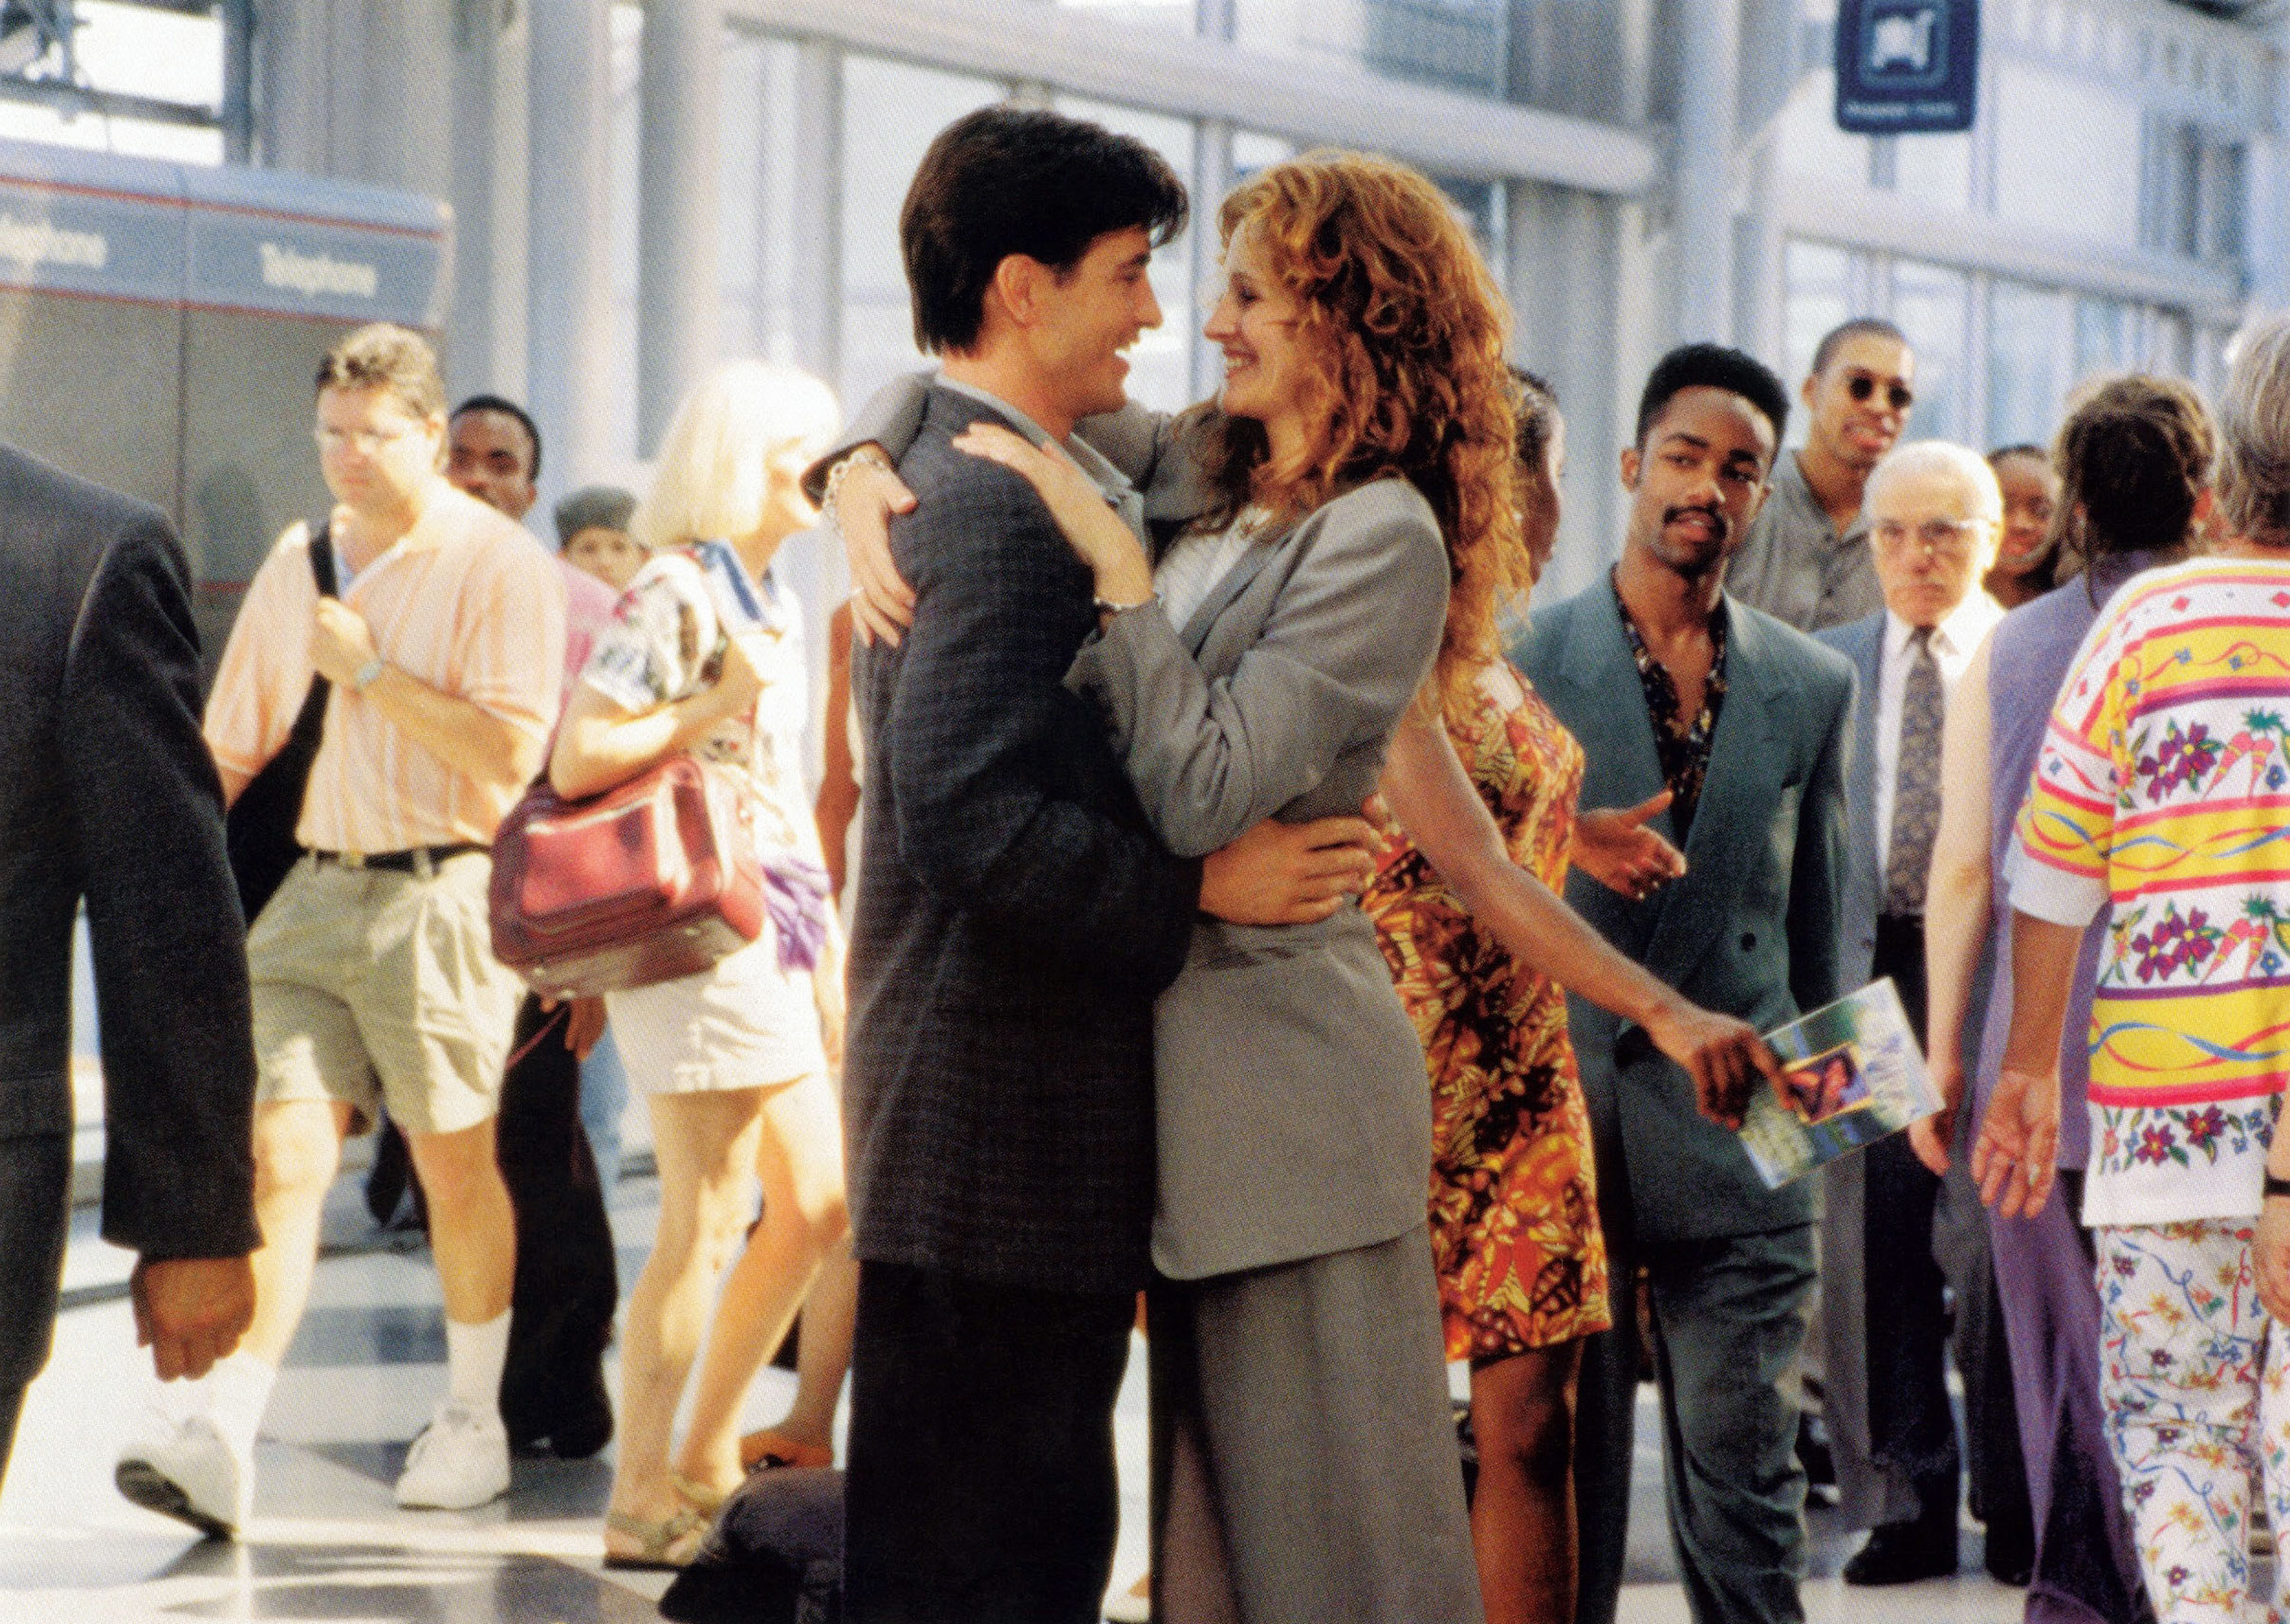 Dermot Mulroney and Julia Roberts in a crowded airport in a scene from the movie